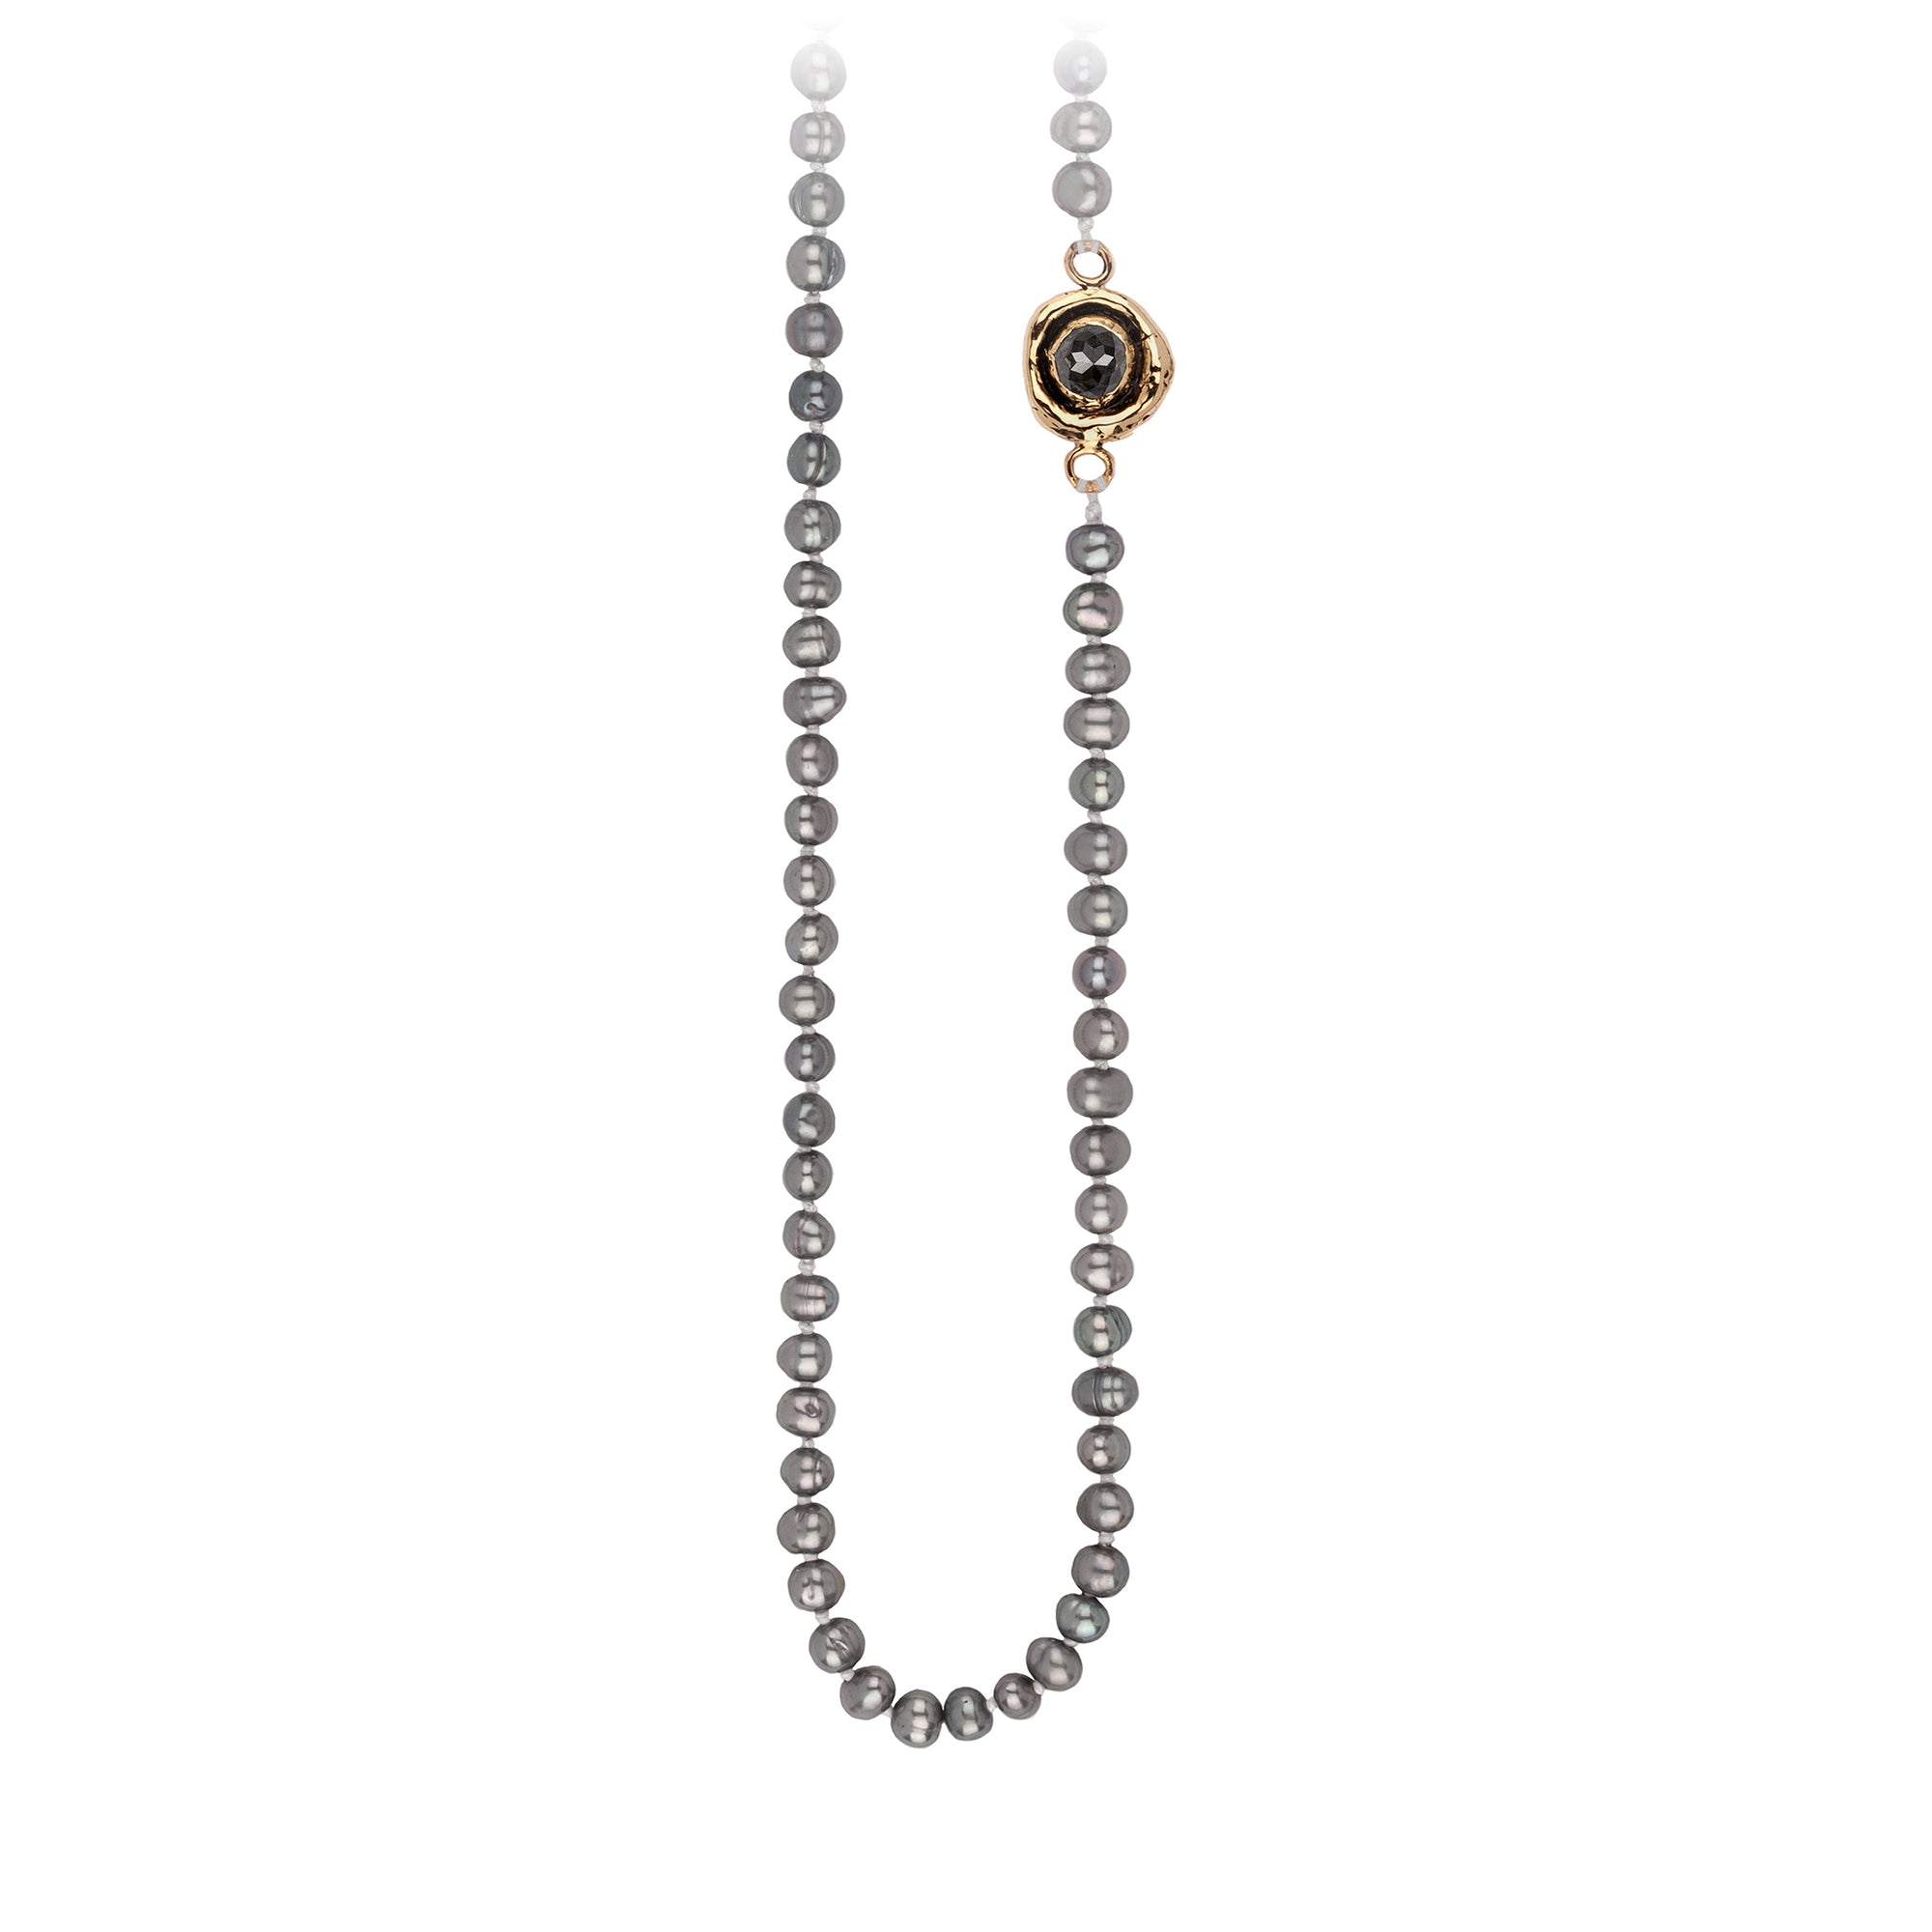 A necklace of hand strung dove grey pearls with a 14k gold bezel set charcoal diamond.